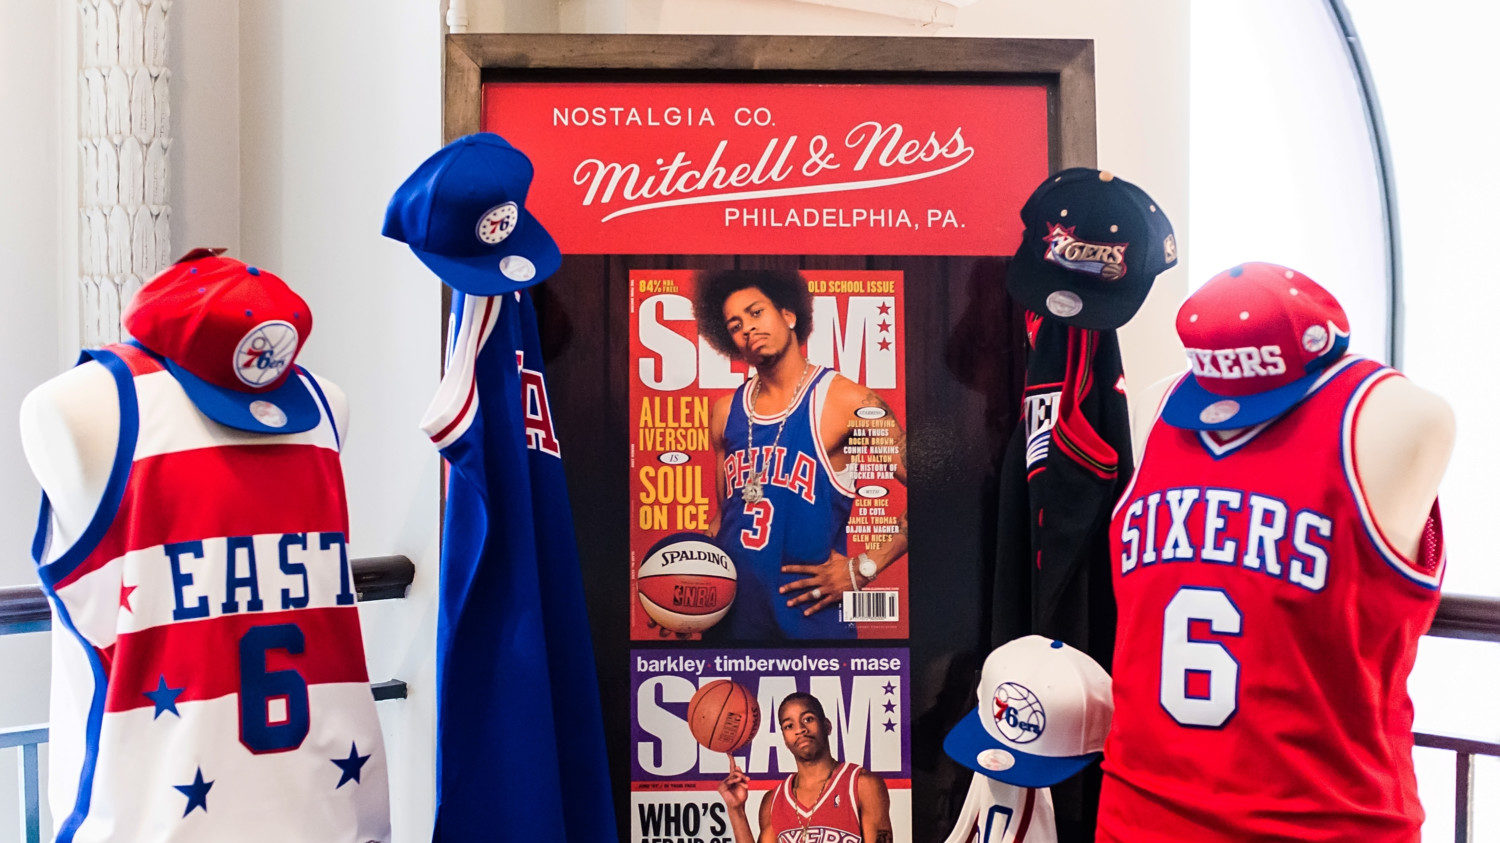 LeBron James, Kevin Durant invest in Fanatics' brand Mitchell & Ness